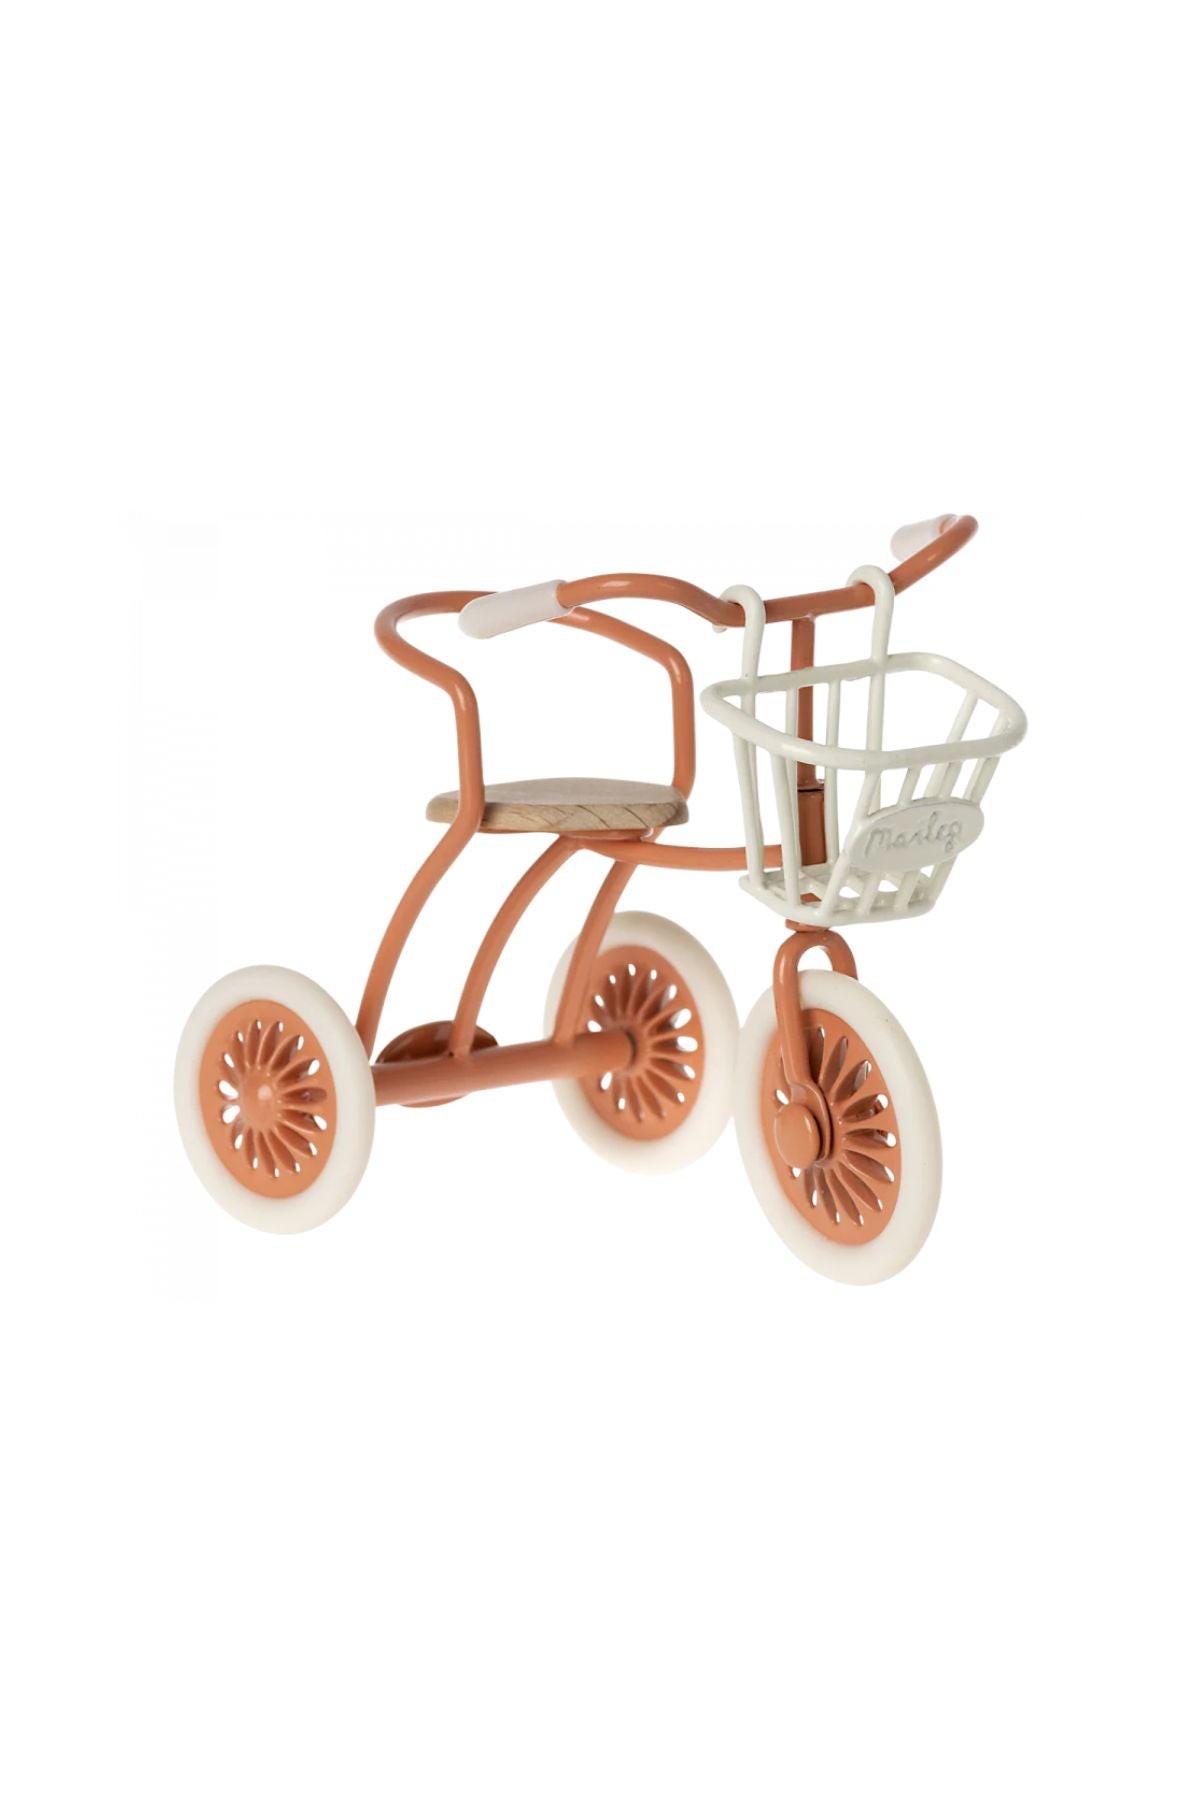 Maileg Tricycle Basket (Mouse Size): Dollhouse Accessory